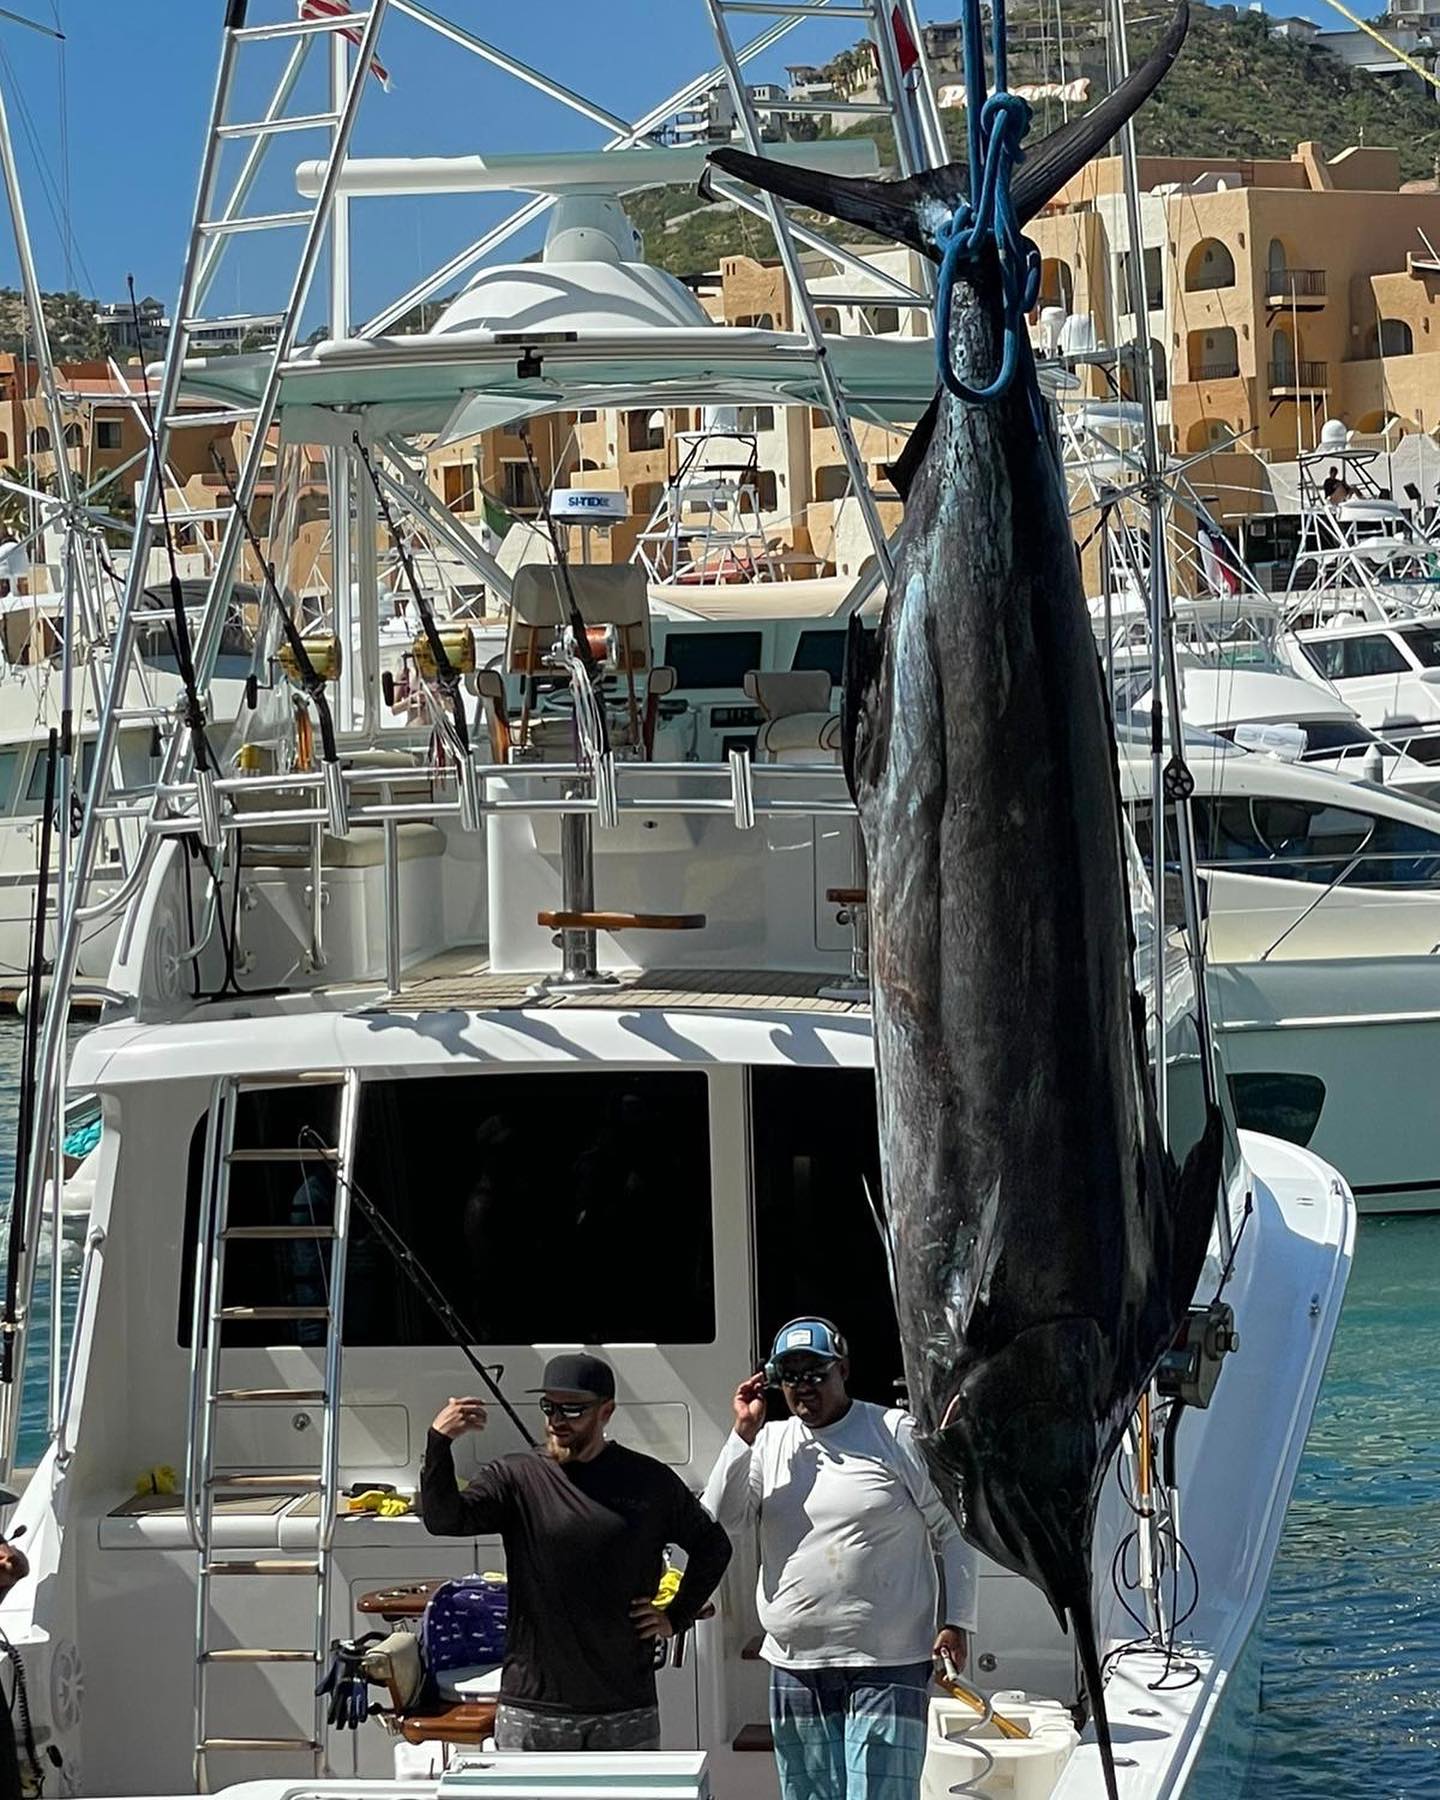 Tournament and team Cabo Magic congratulations to Zach & Hiram and the clients aboard now in First Place in the @loscabosbillfishtournament  We proudly represent them 😎